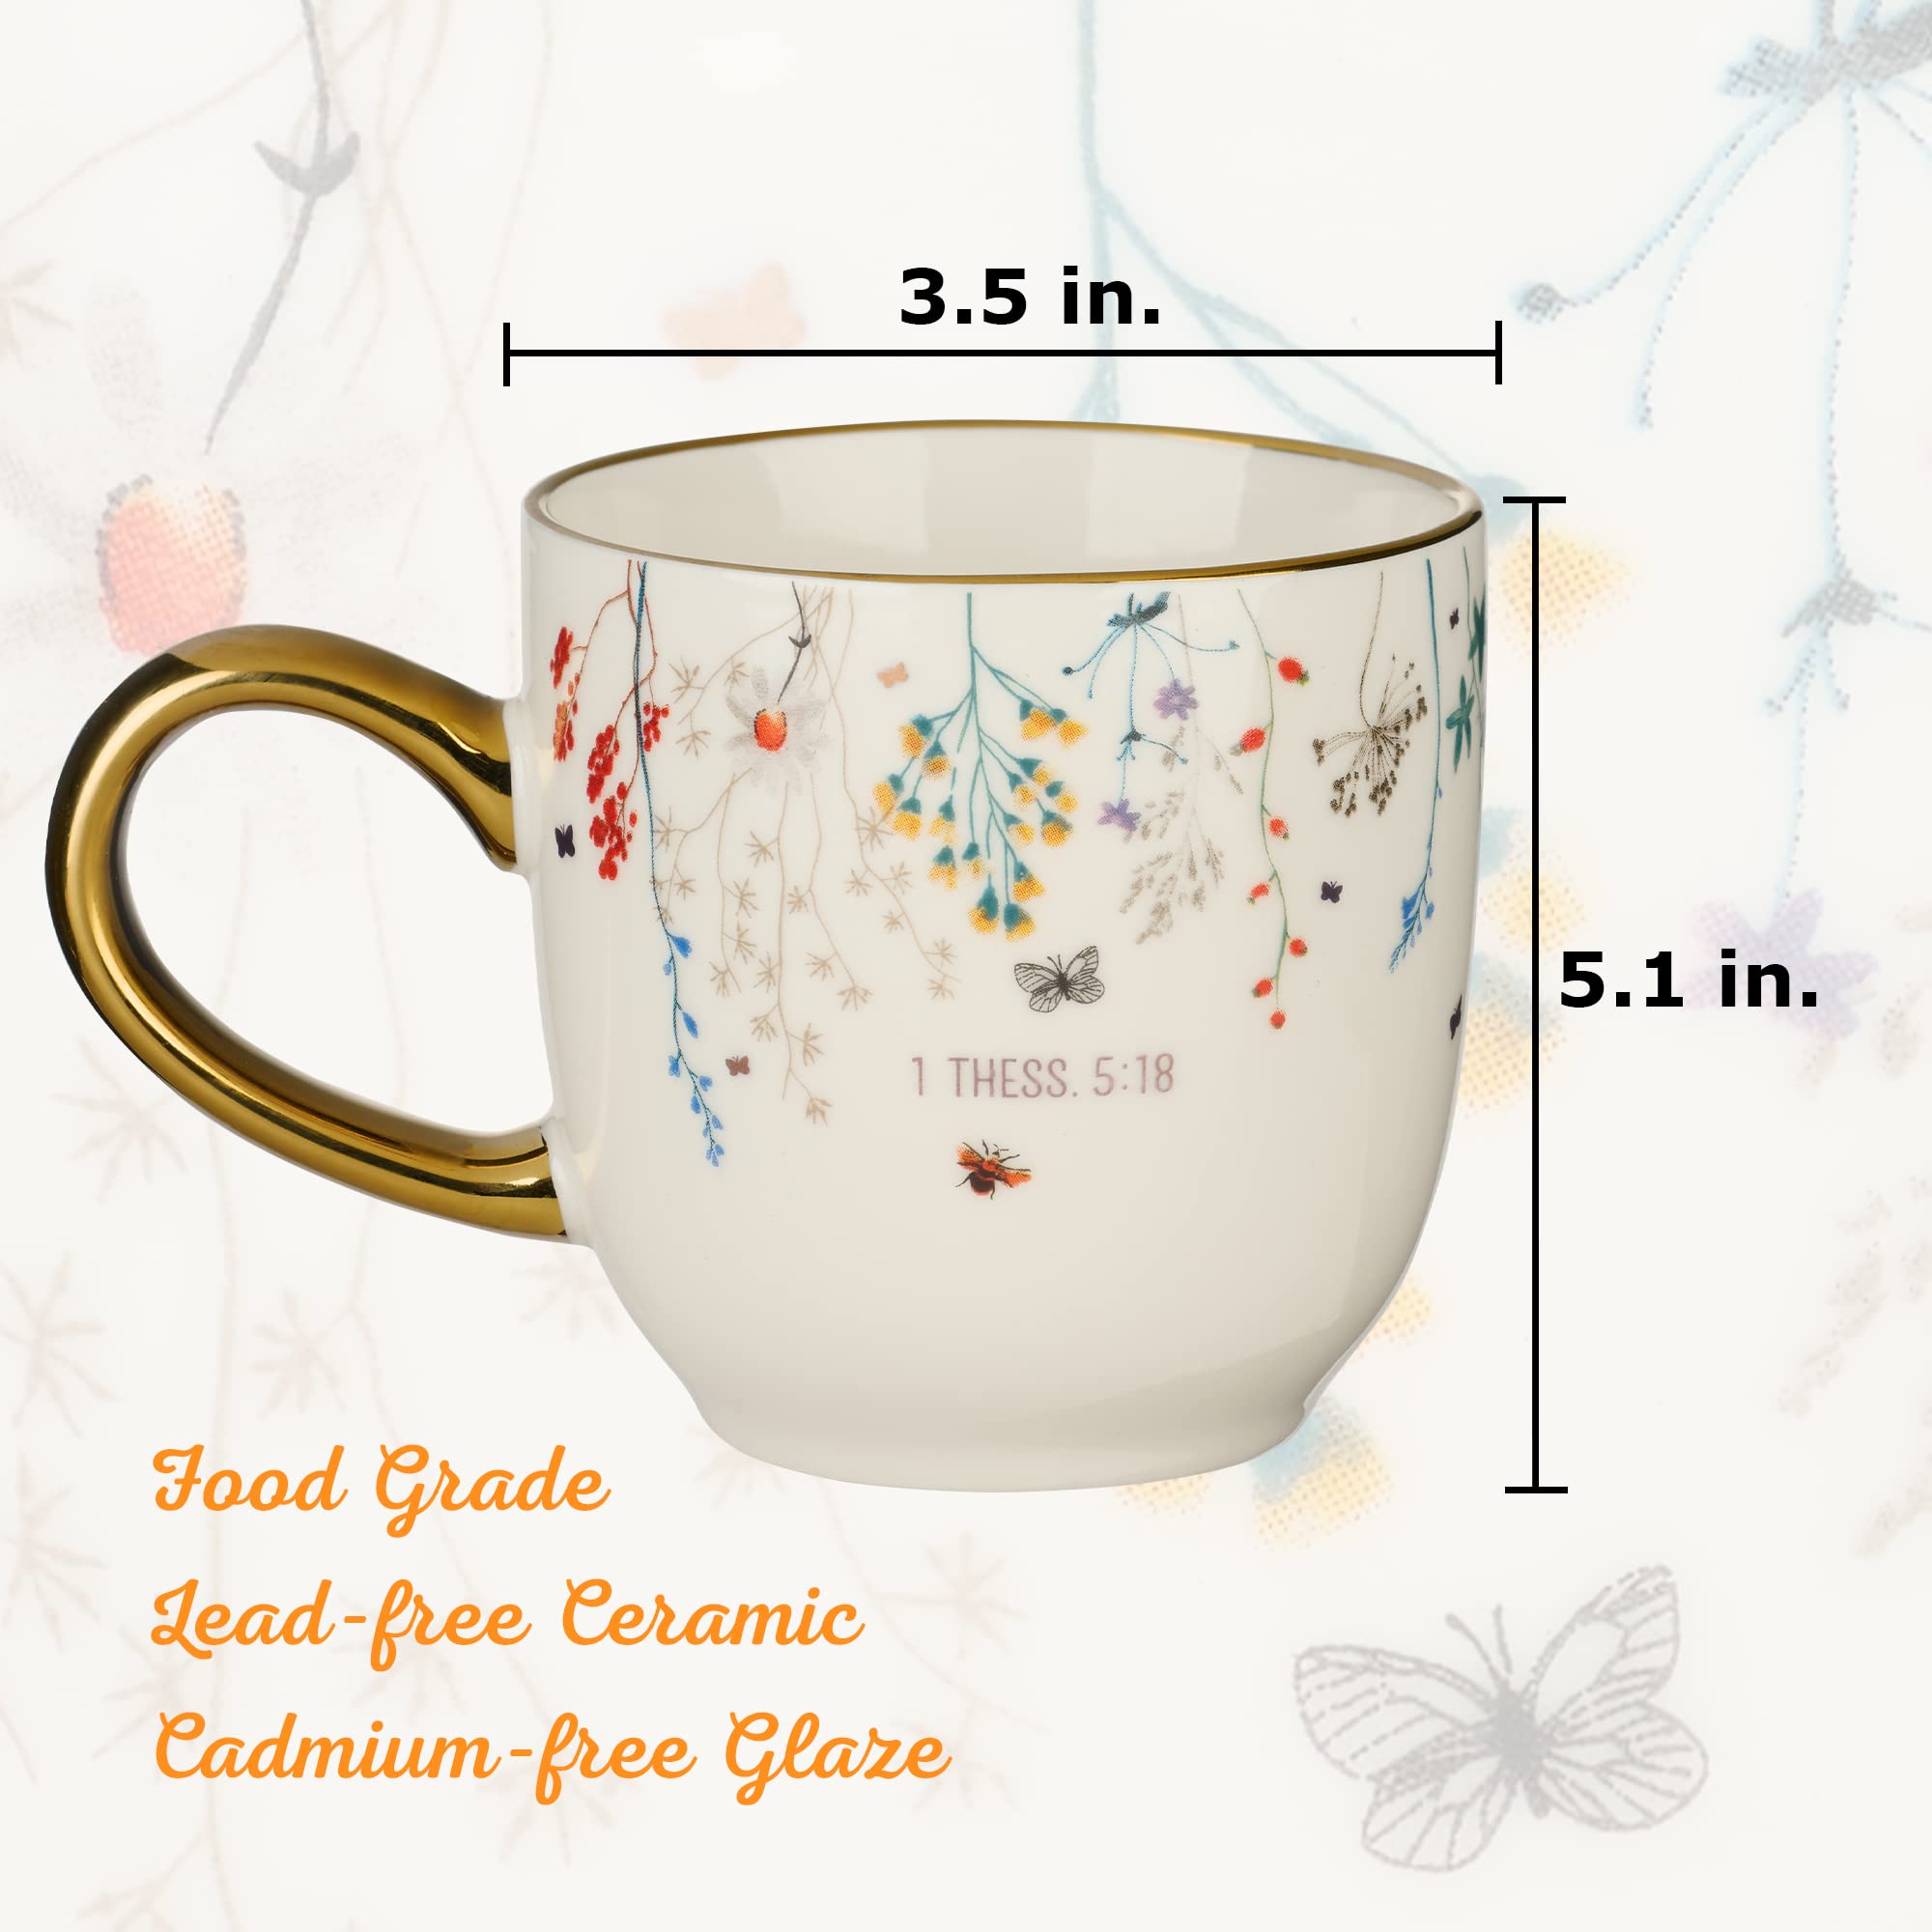 Christian Art Gifts White & Gold Floral Ceramic Coffee & Tea Mug for Women: Give Thanks - 1 Thess. 5:18 Inspirational Bible Verse w/Multicolor Flowers, Butterflies & Bees, Cute Novelty Cup, 11 fl. oz.